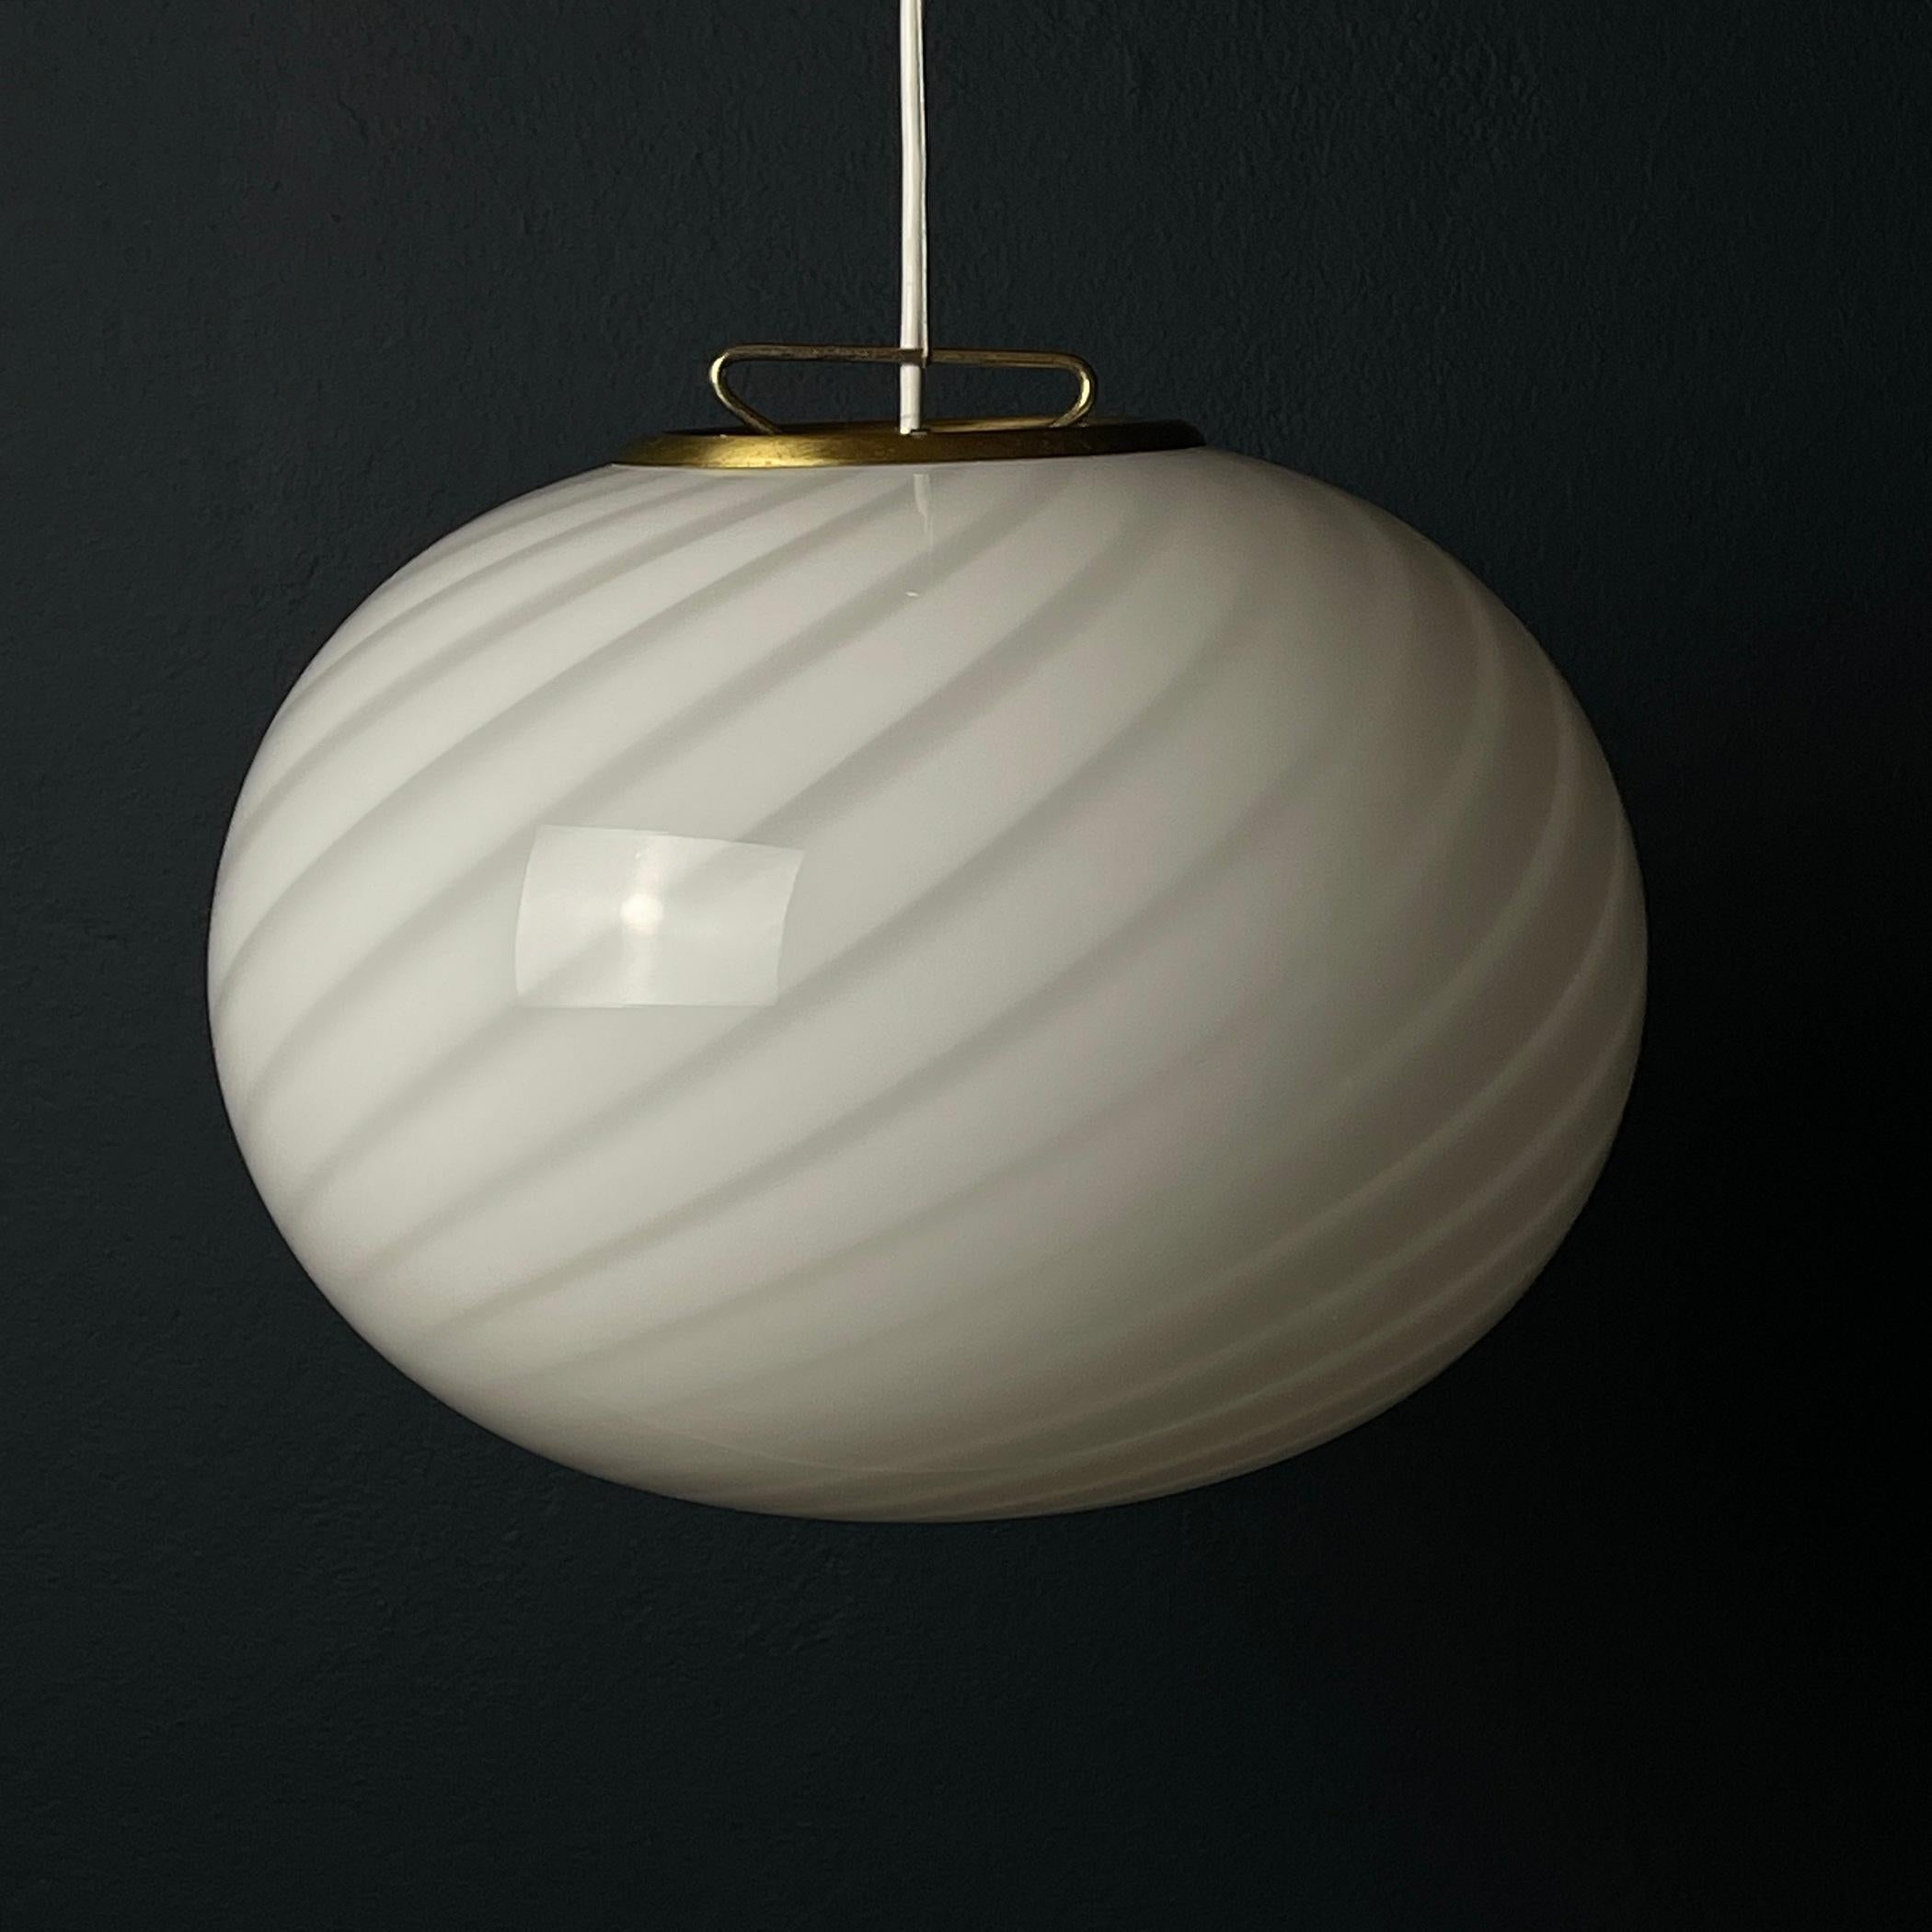 Transport your space to the stylish '70s with this captivating Italian swirl Murano lamp. Crafted in Italy, it features exquisite white Murano glass fashioned into a spherical form with elegant bends that exude a sense of timeless beauty. This lamp